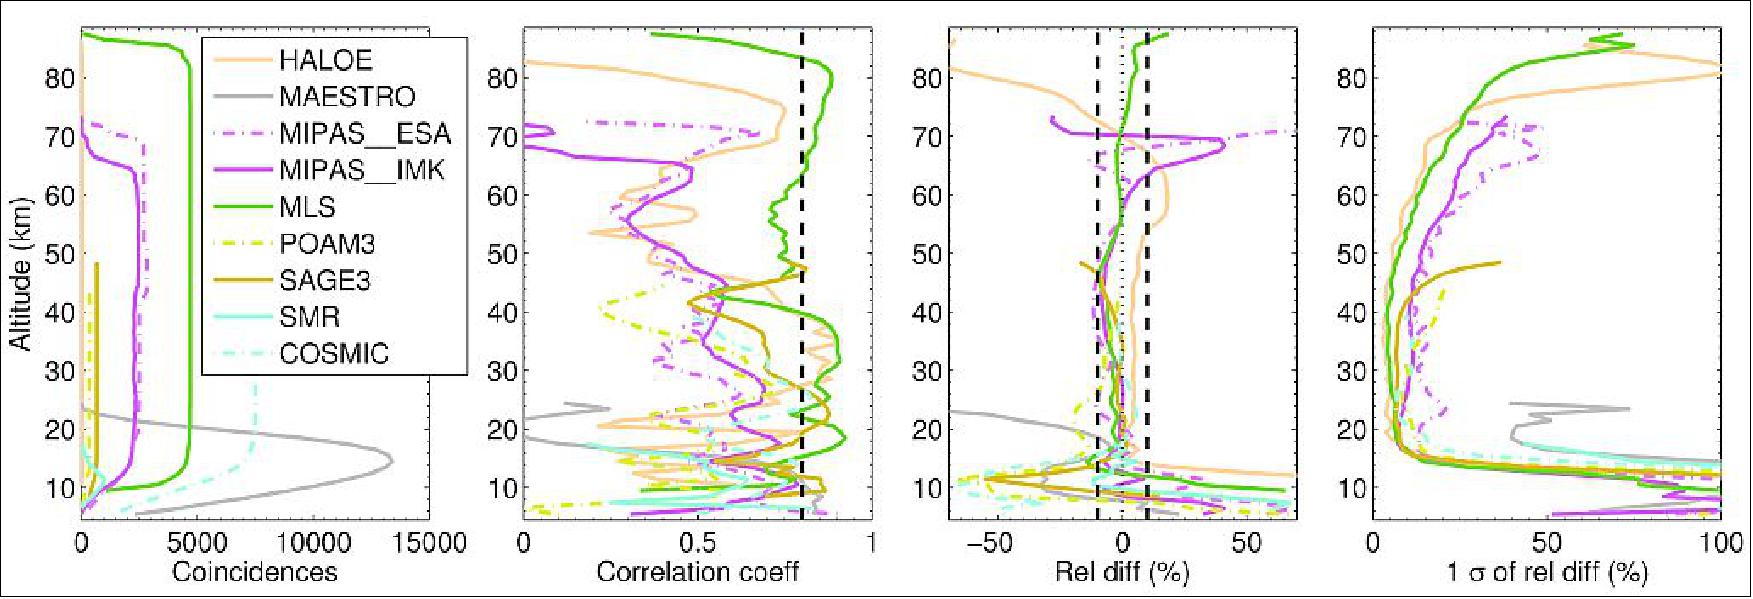 Figure 10: Initial ACE-FTS water vapor validation results incorporating the COSMIC 2013 reanalysis data product. (image credit: University of Toronto, University of Waterloo, NASA/JPL)